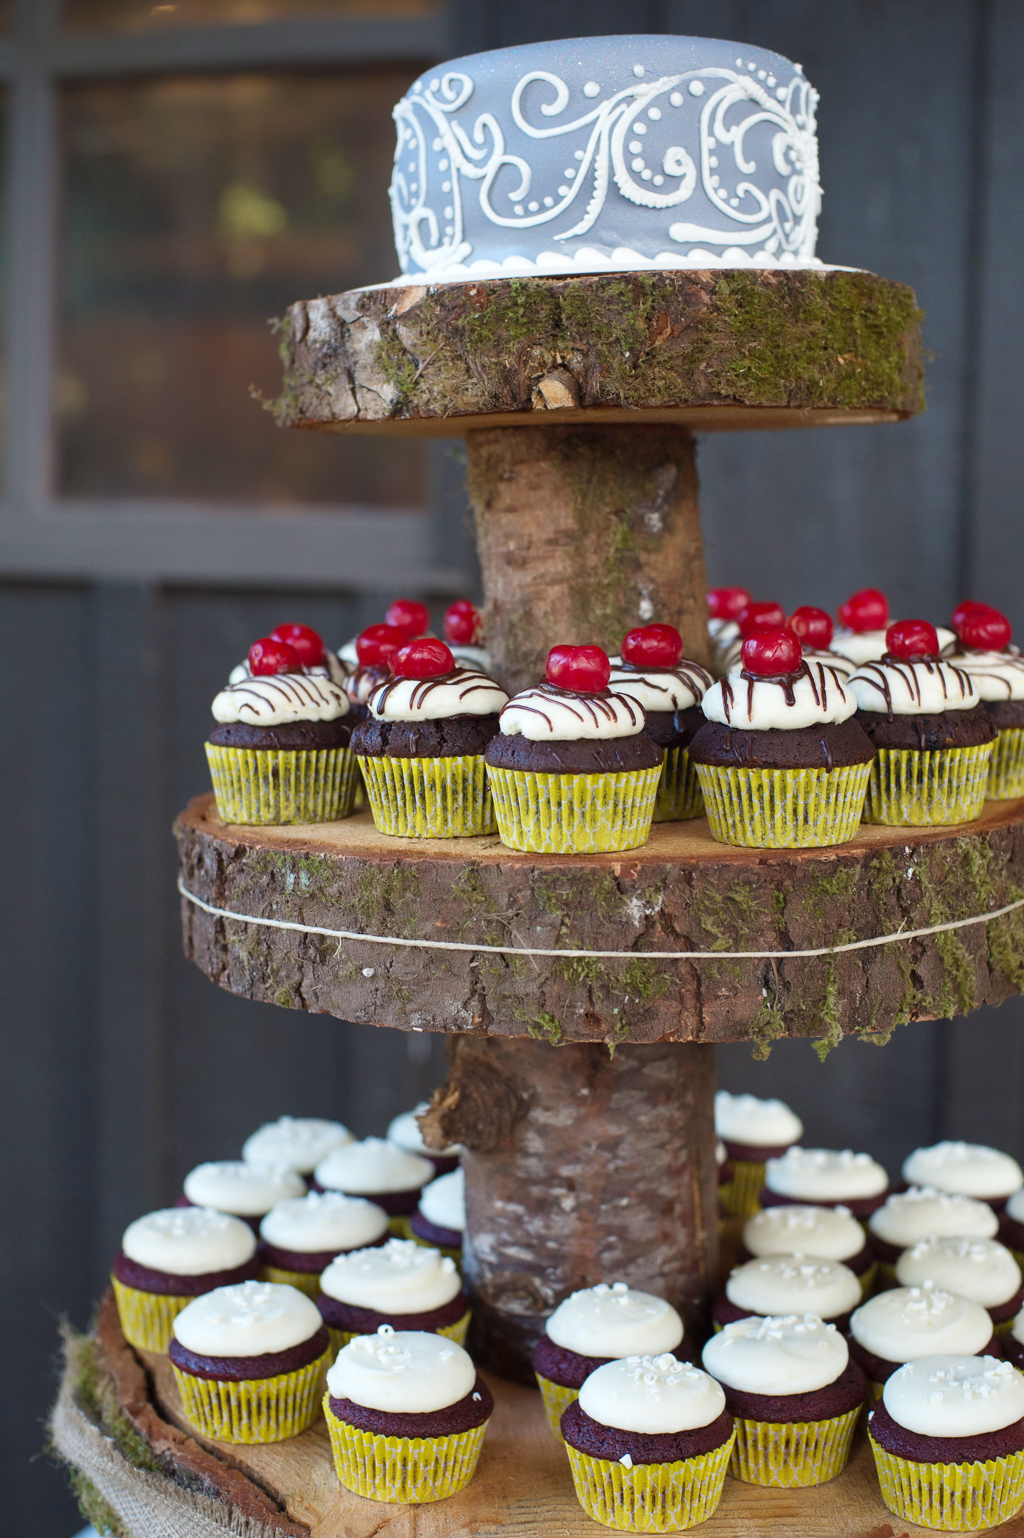 cupcakes on wooden tree stumps create a tier cake